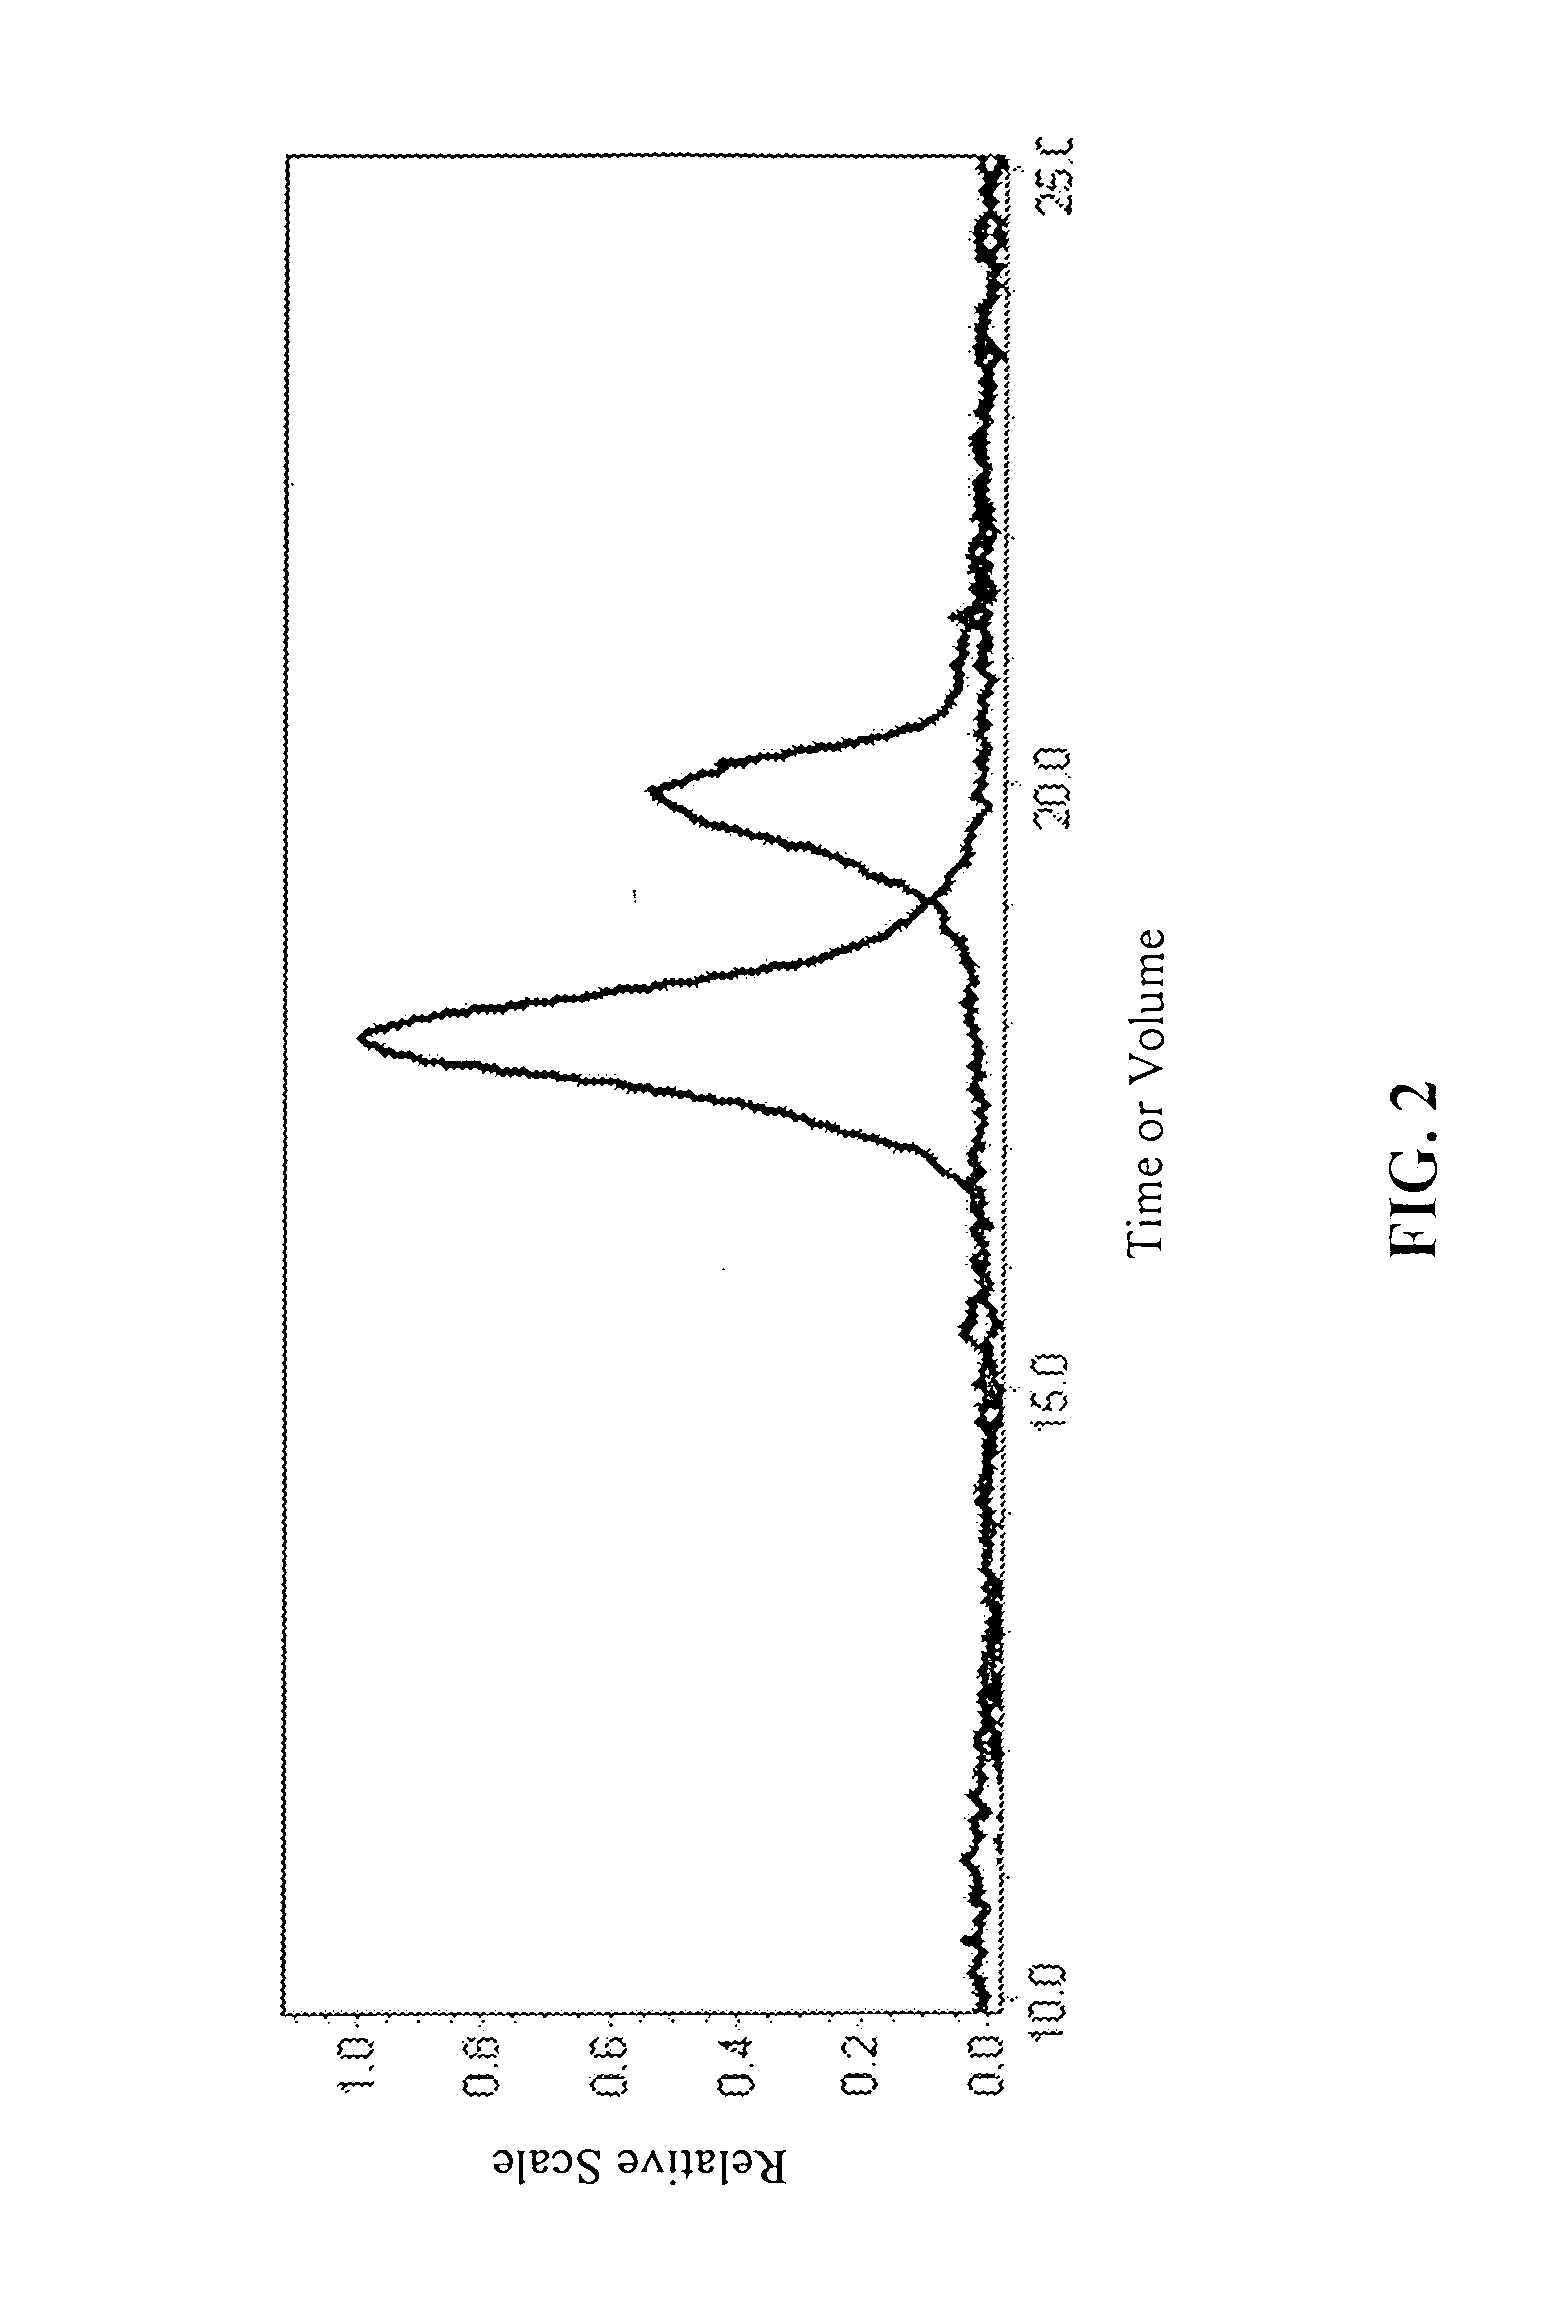 Poly-beta-peptides from functionalized beta-lactam monomers and antibacterial compositions containing same